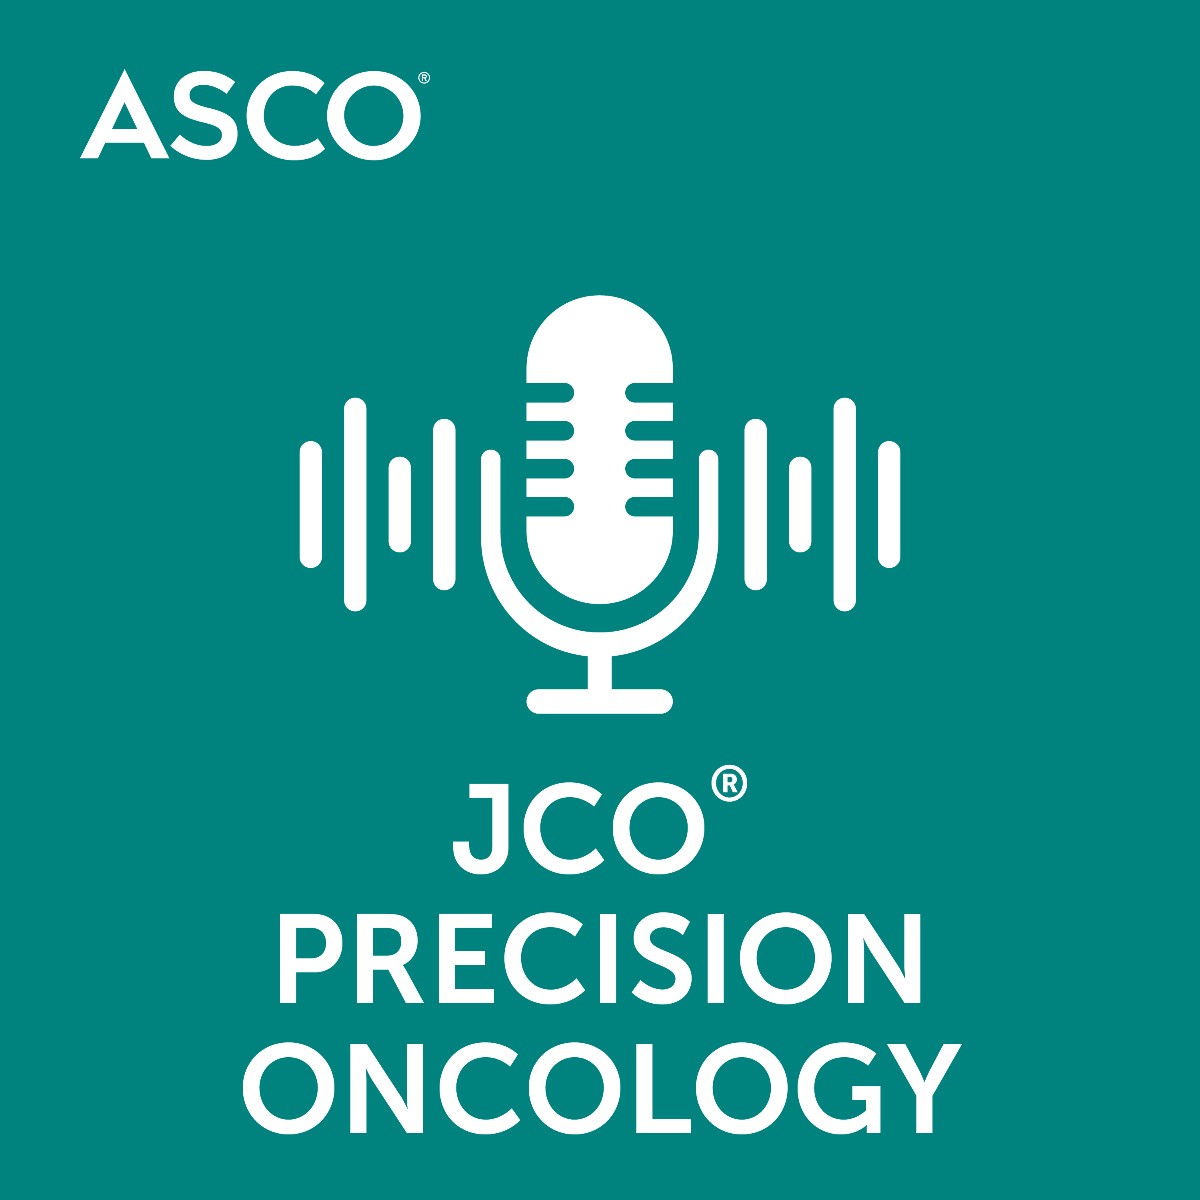 🎧 Listen now! 

In this JCO PO Conversations podcast episode, host @thenasheffect speaks with Dr. Edward Esplin & Prof. Heather Hampel, who discuss their latest #JCOPO article ➡️ fal.cn/3vVQA